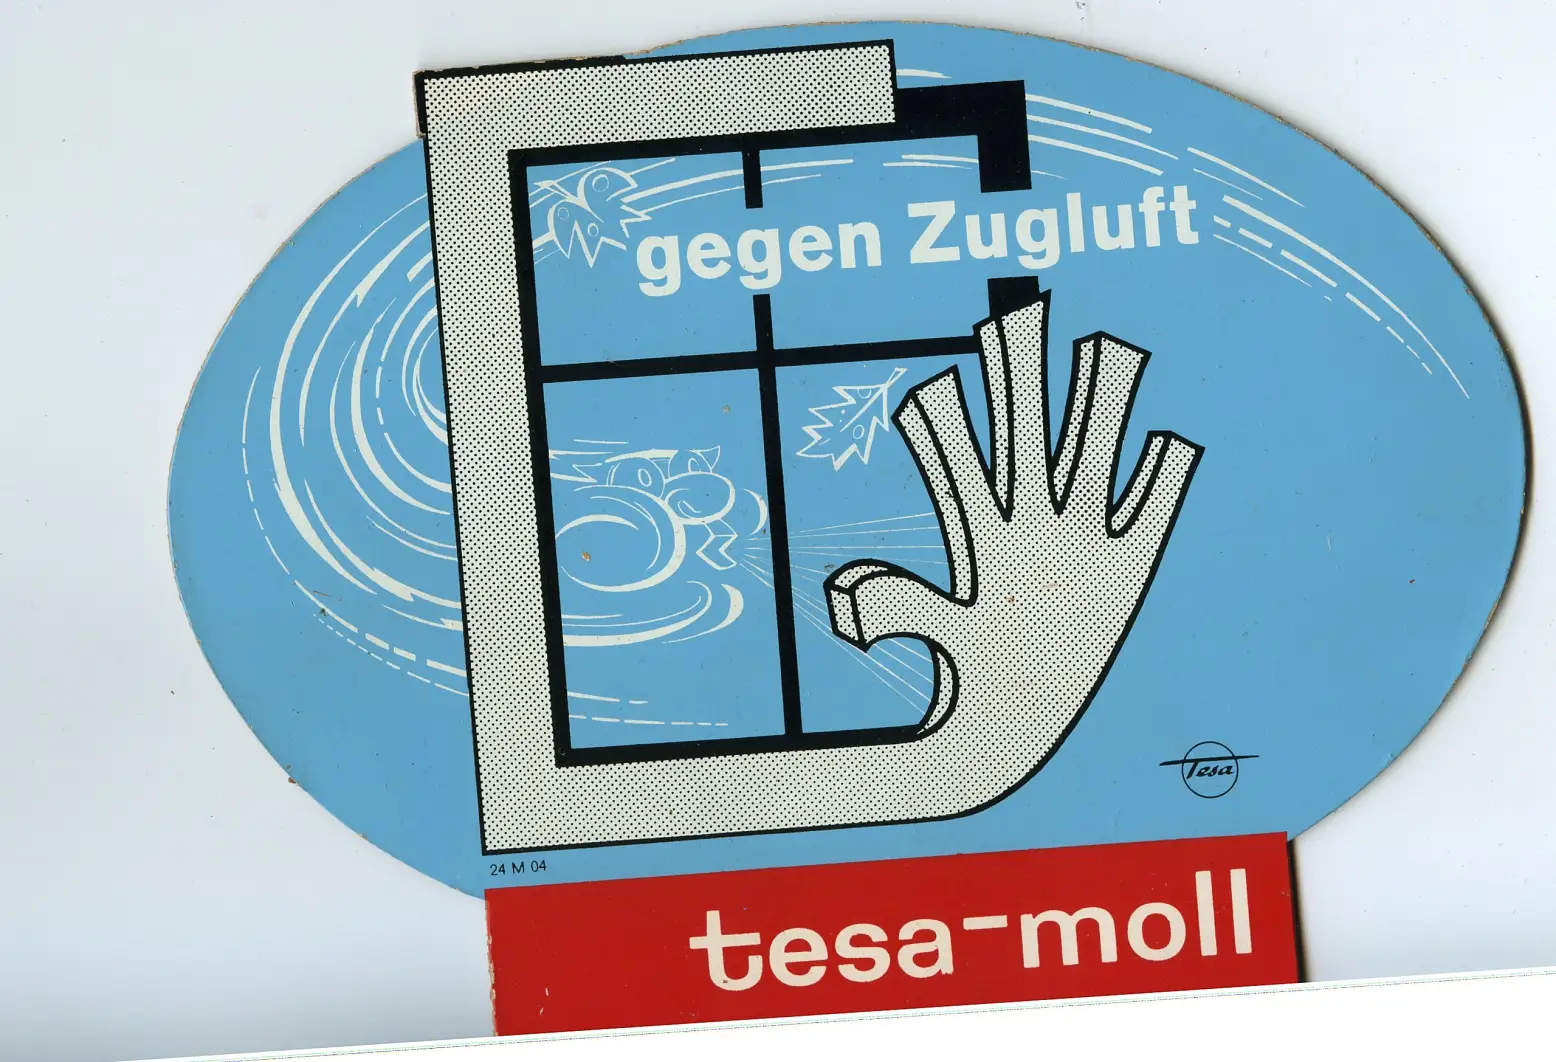 Drafty windows and doors? As early as the 1950s, tesamoll® proved to be an innovative blessing. Many houses were still destroyed, and it was bitterly cold in the post-war winters. Self-adhesive tesamoll® was a simple and extremely inexpensive solution for do-it-yourselfers to make their homes cozy. Little effort - great benefit. Still today.